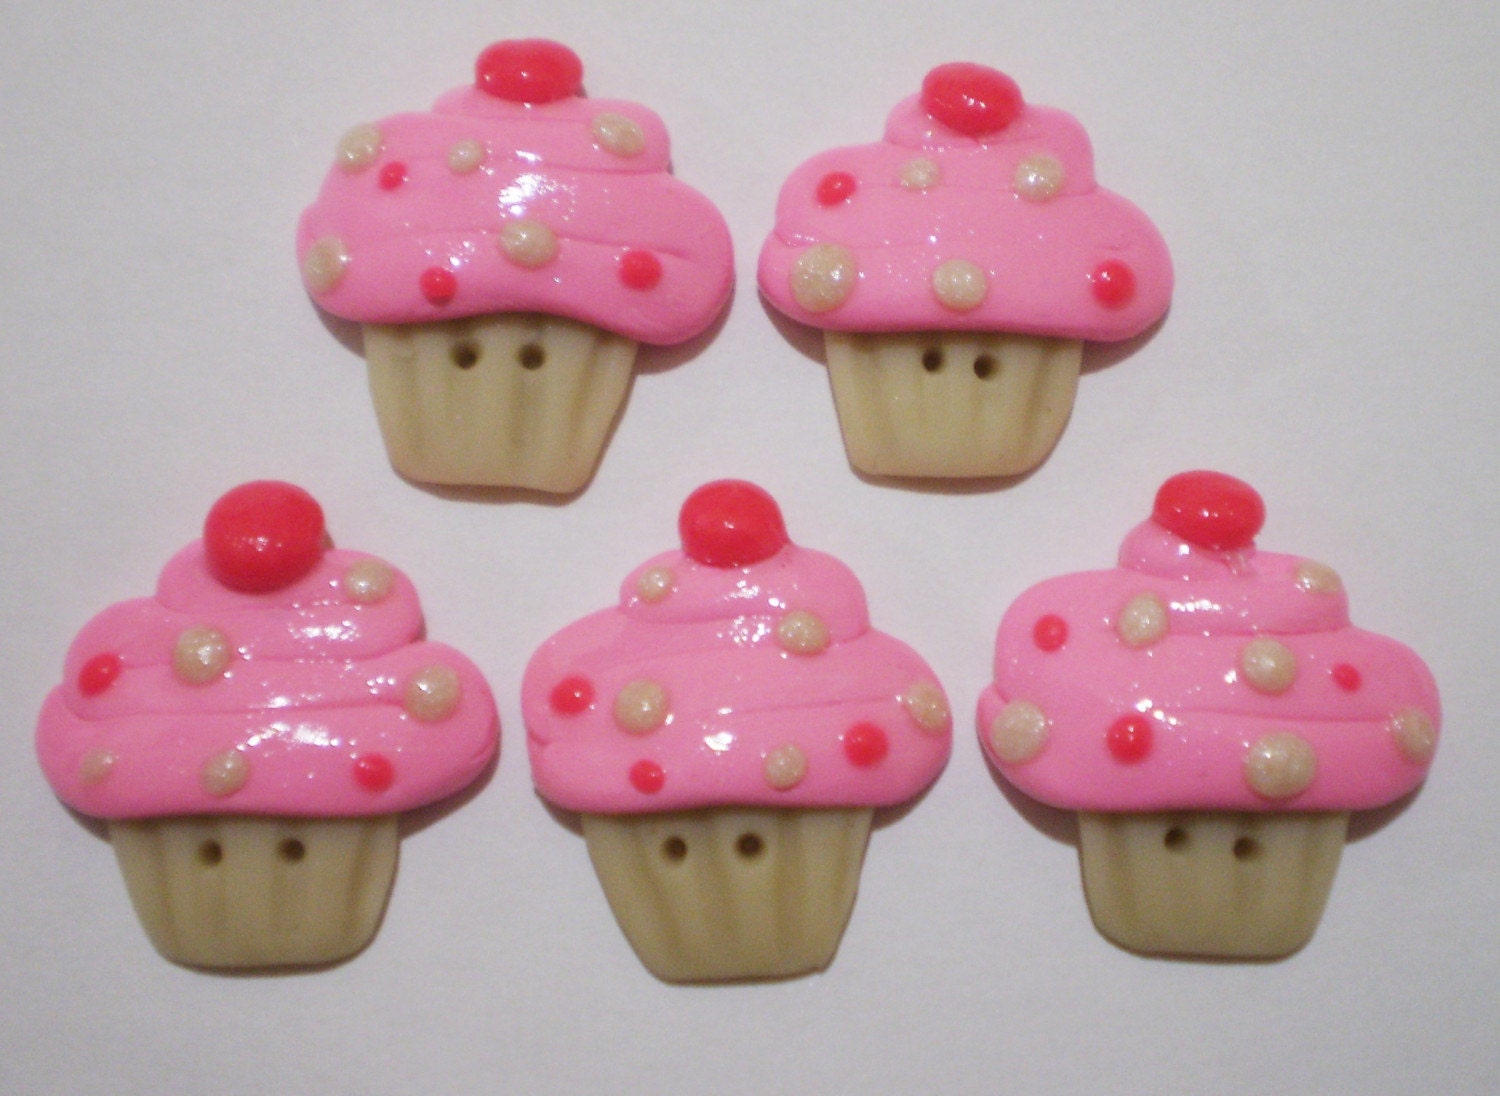 CUPCAKE handmade sculpey polymer clay deco buttons x 5 for scrapbooking or